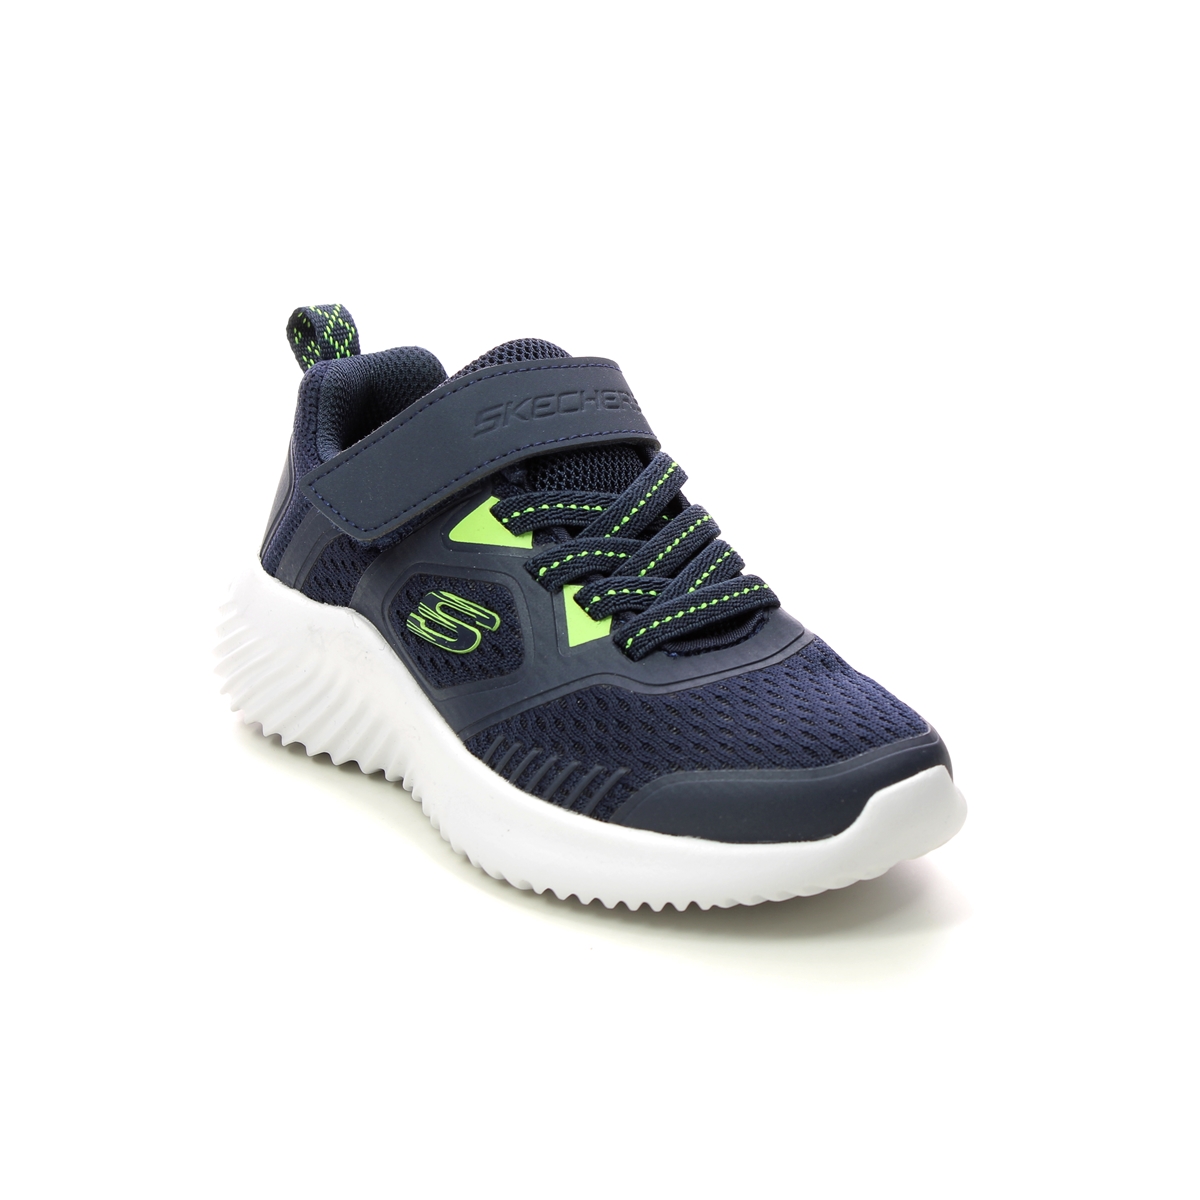 Skechers Bounder NVLM Navy Lime Kids trainers 403736L in a Plain Textile in Size 35